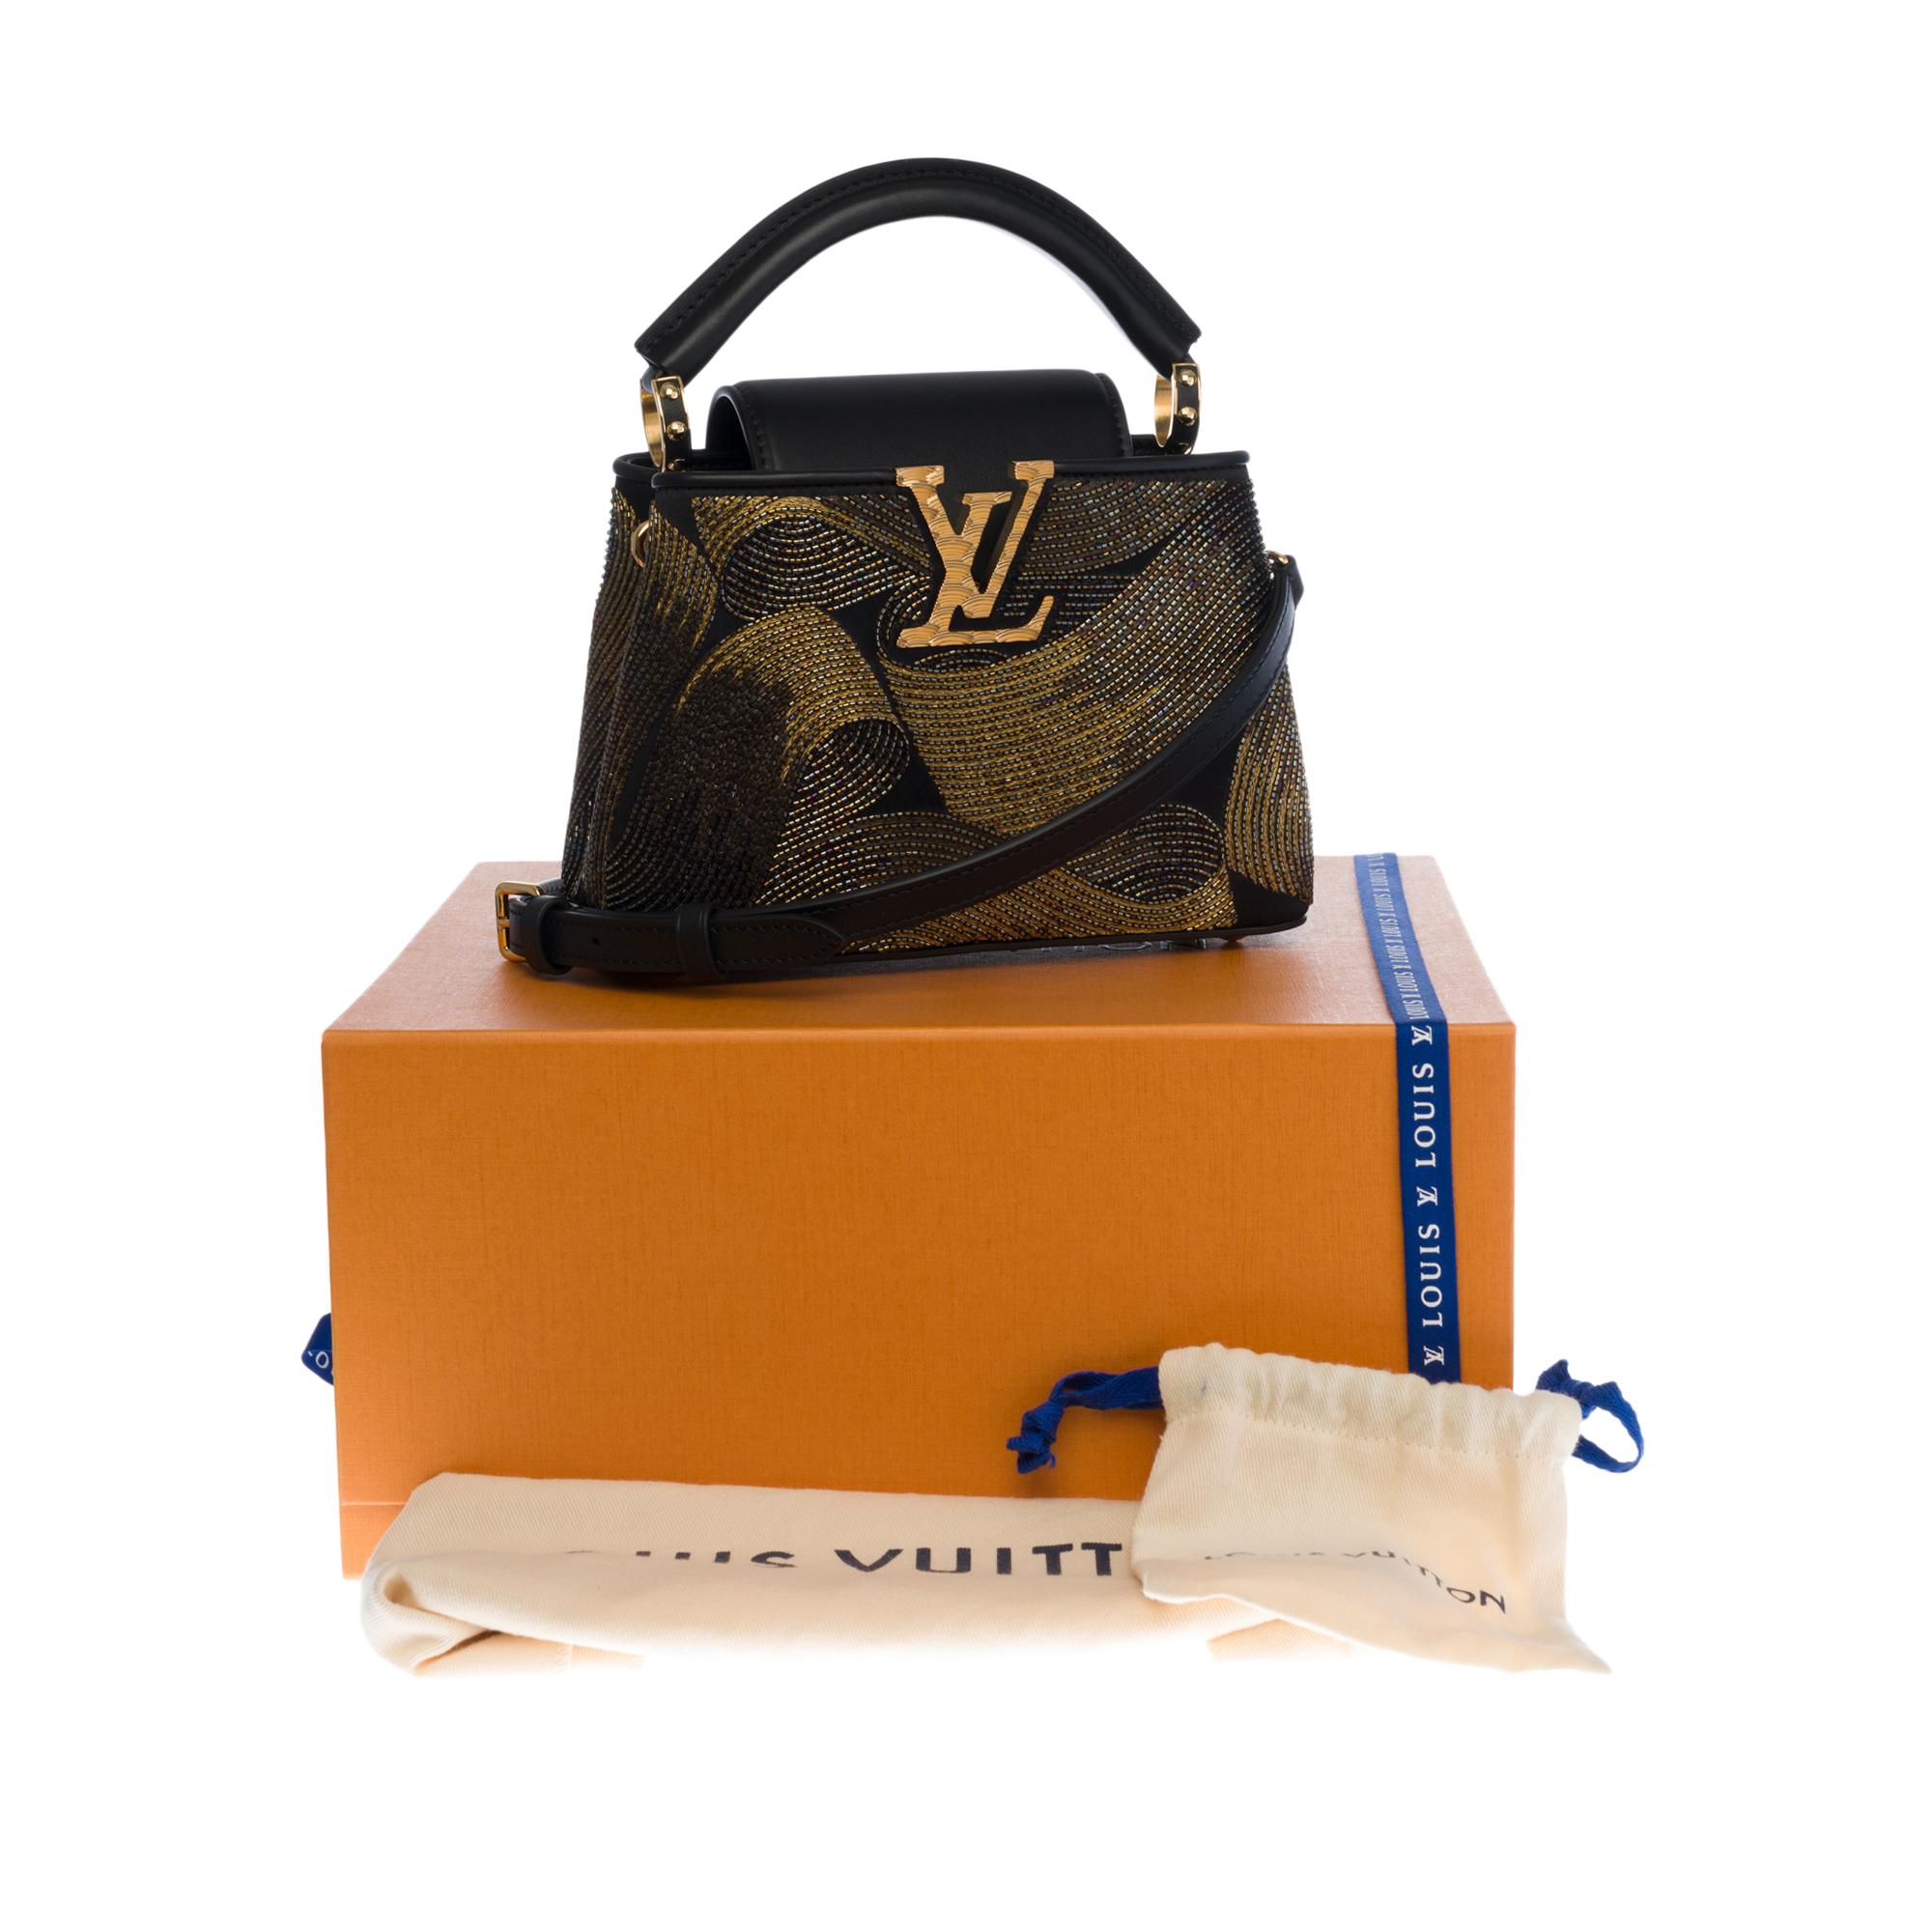 Louis Vuitton Capucines Mini handbag with strap in black and gold beads, GHW 2